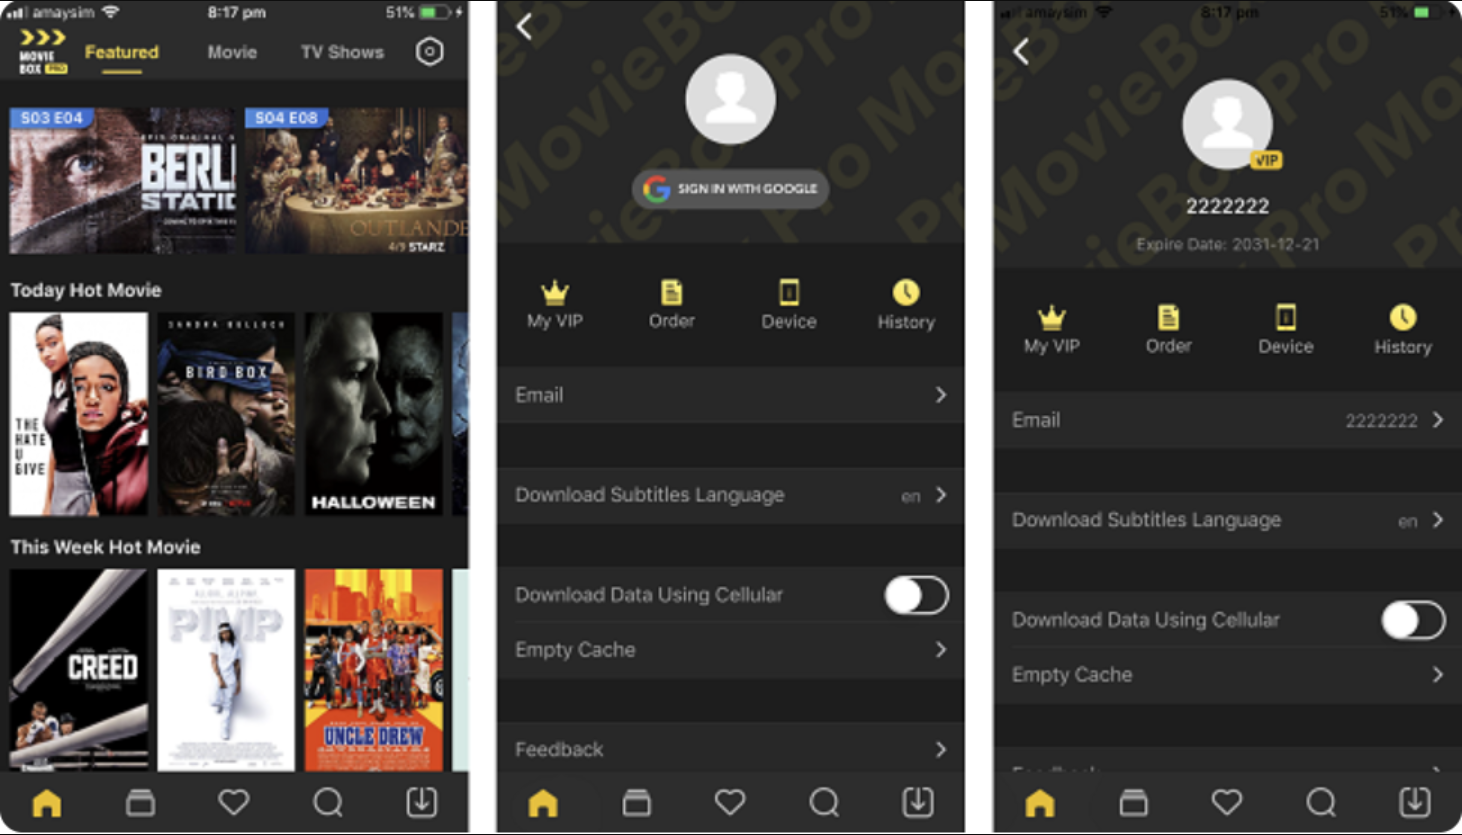 Login to Movie Box Pro app with Google Credentials - FREE VIP